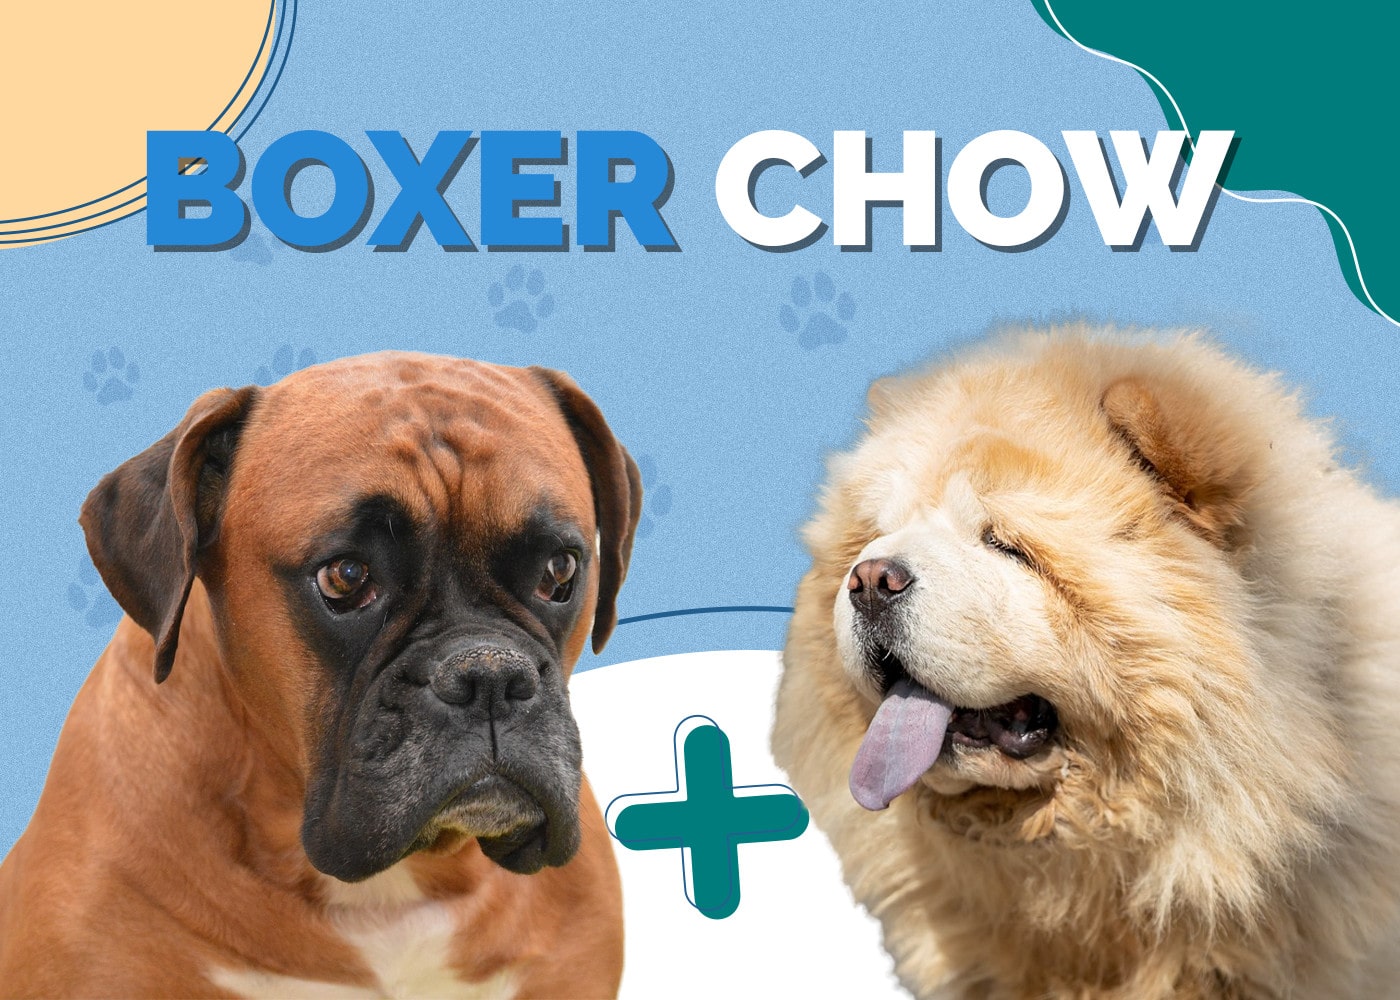 Boxer Chow (Boxer & Chow Chow Mix)